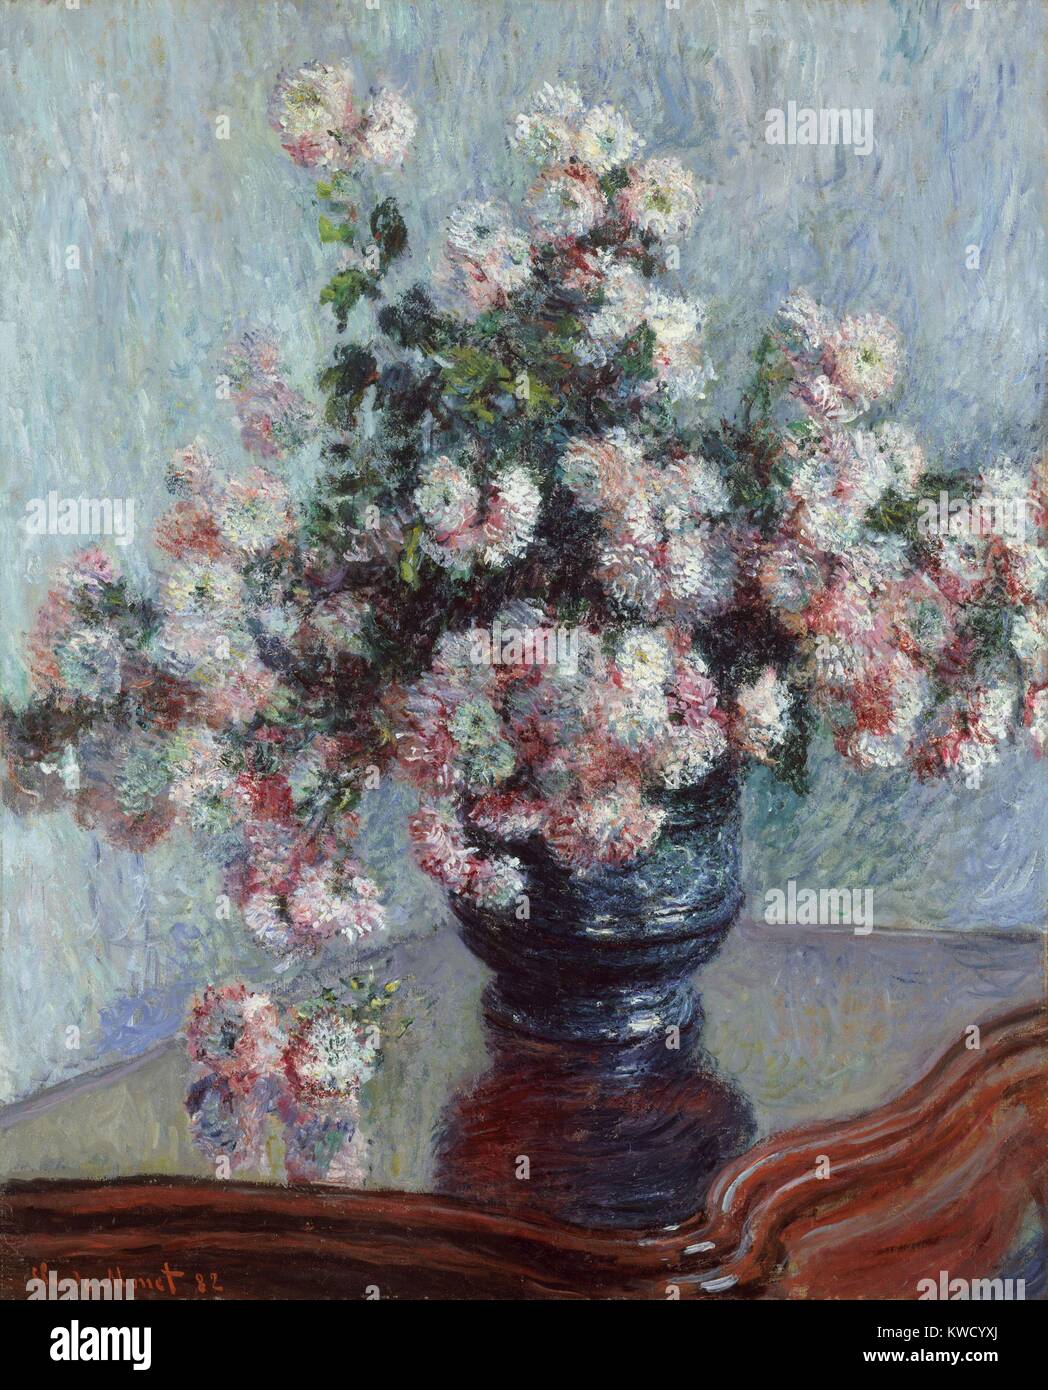 Chrysanthemums, by Claude Monet, 1882, French impressionist painting, oil on canvas. Monets twenty floral still lifes painted between 1878 and 1883, received critical and commercial success (BSLOC 2017 3 34) Stock Photo